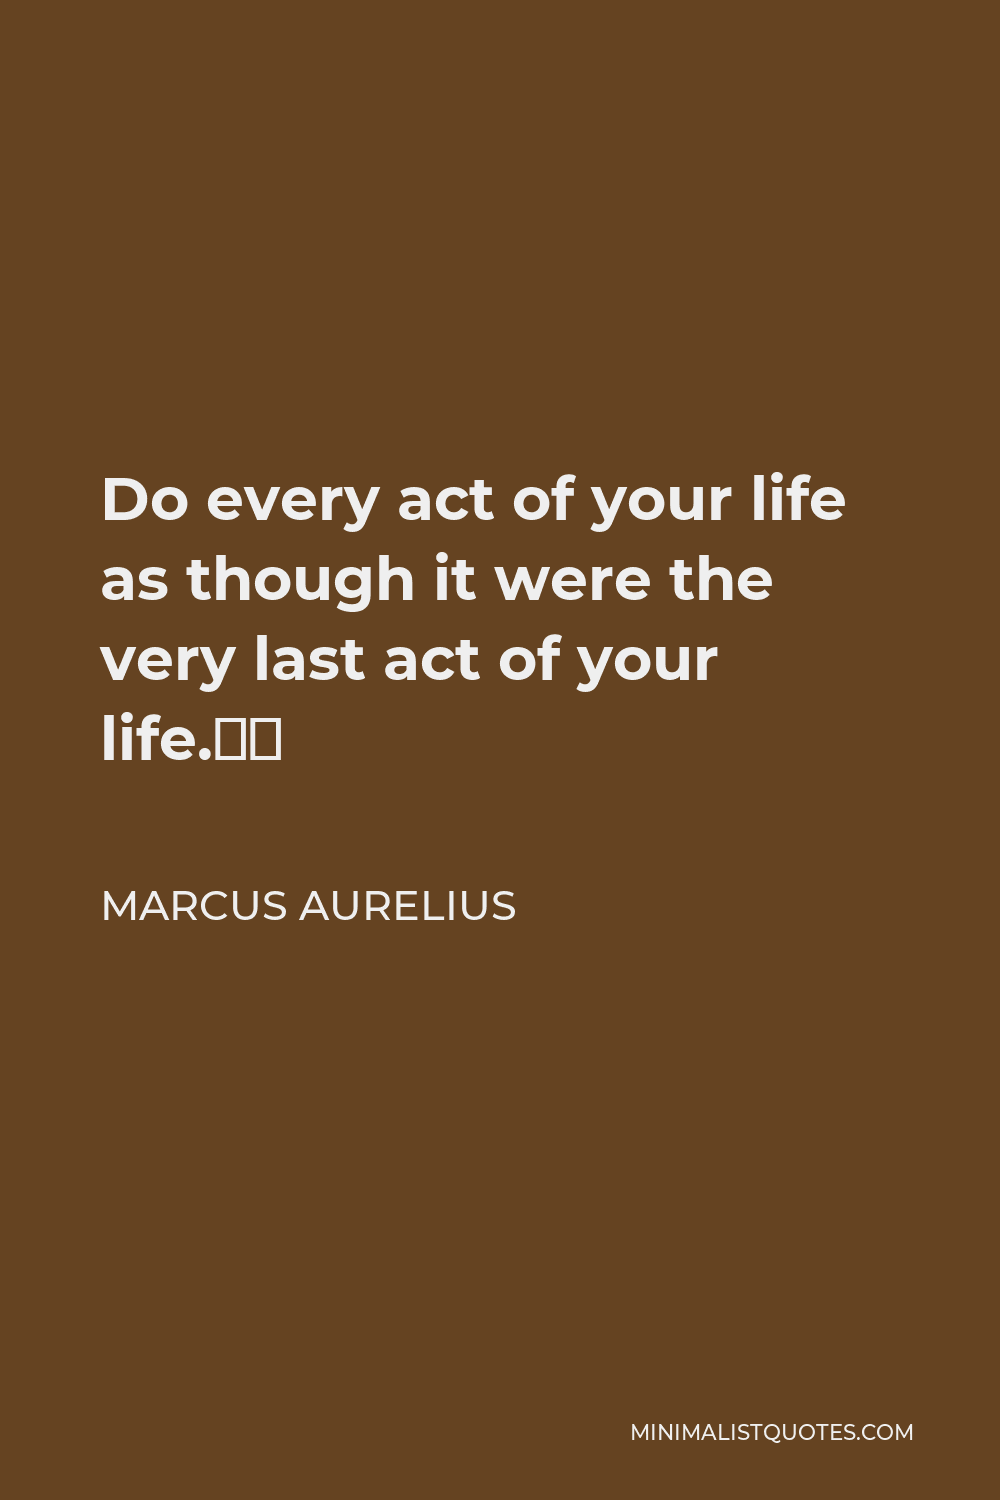 Marcus Aurelius Quote - Do every act of your life as though it were the very last act of your life.”